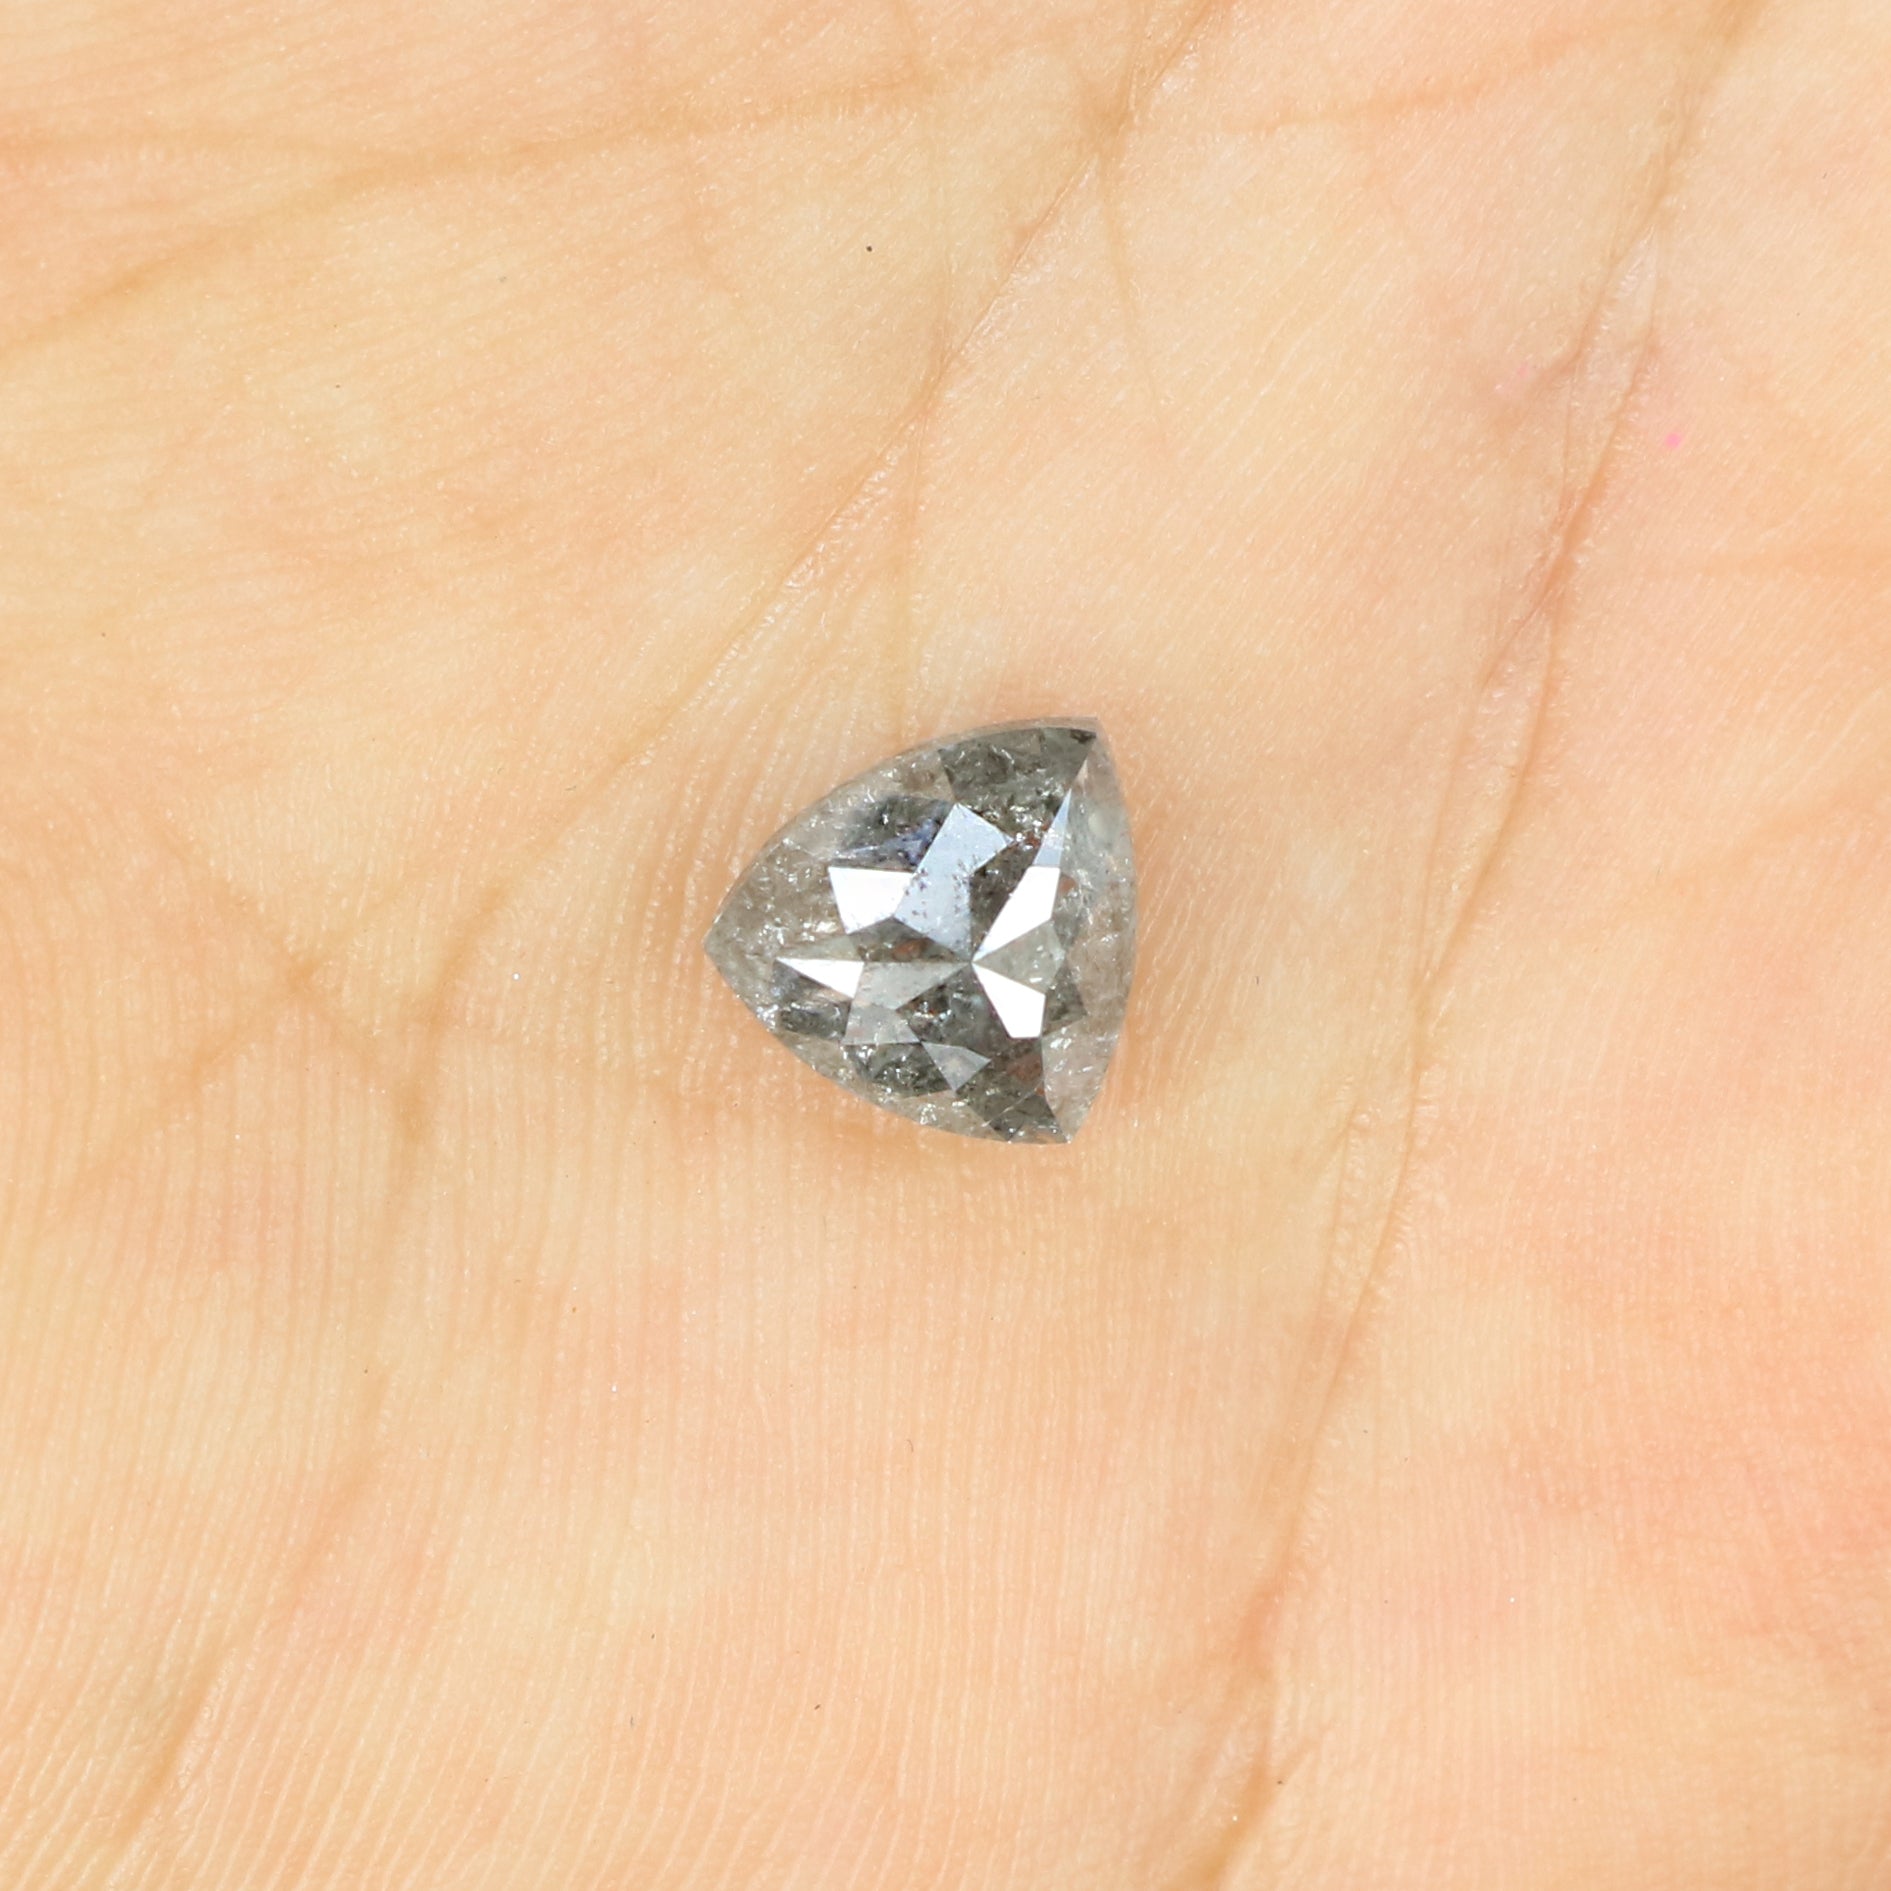 1.67 Ct Natural Loose Diamond Triangle Black Grey Salt And Pepper Color I3 Clarity 7.30 MM KDL8124